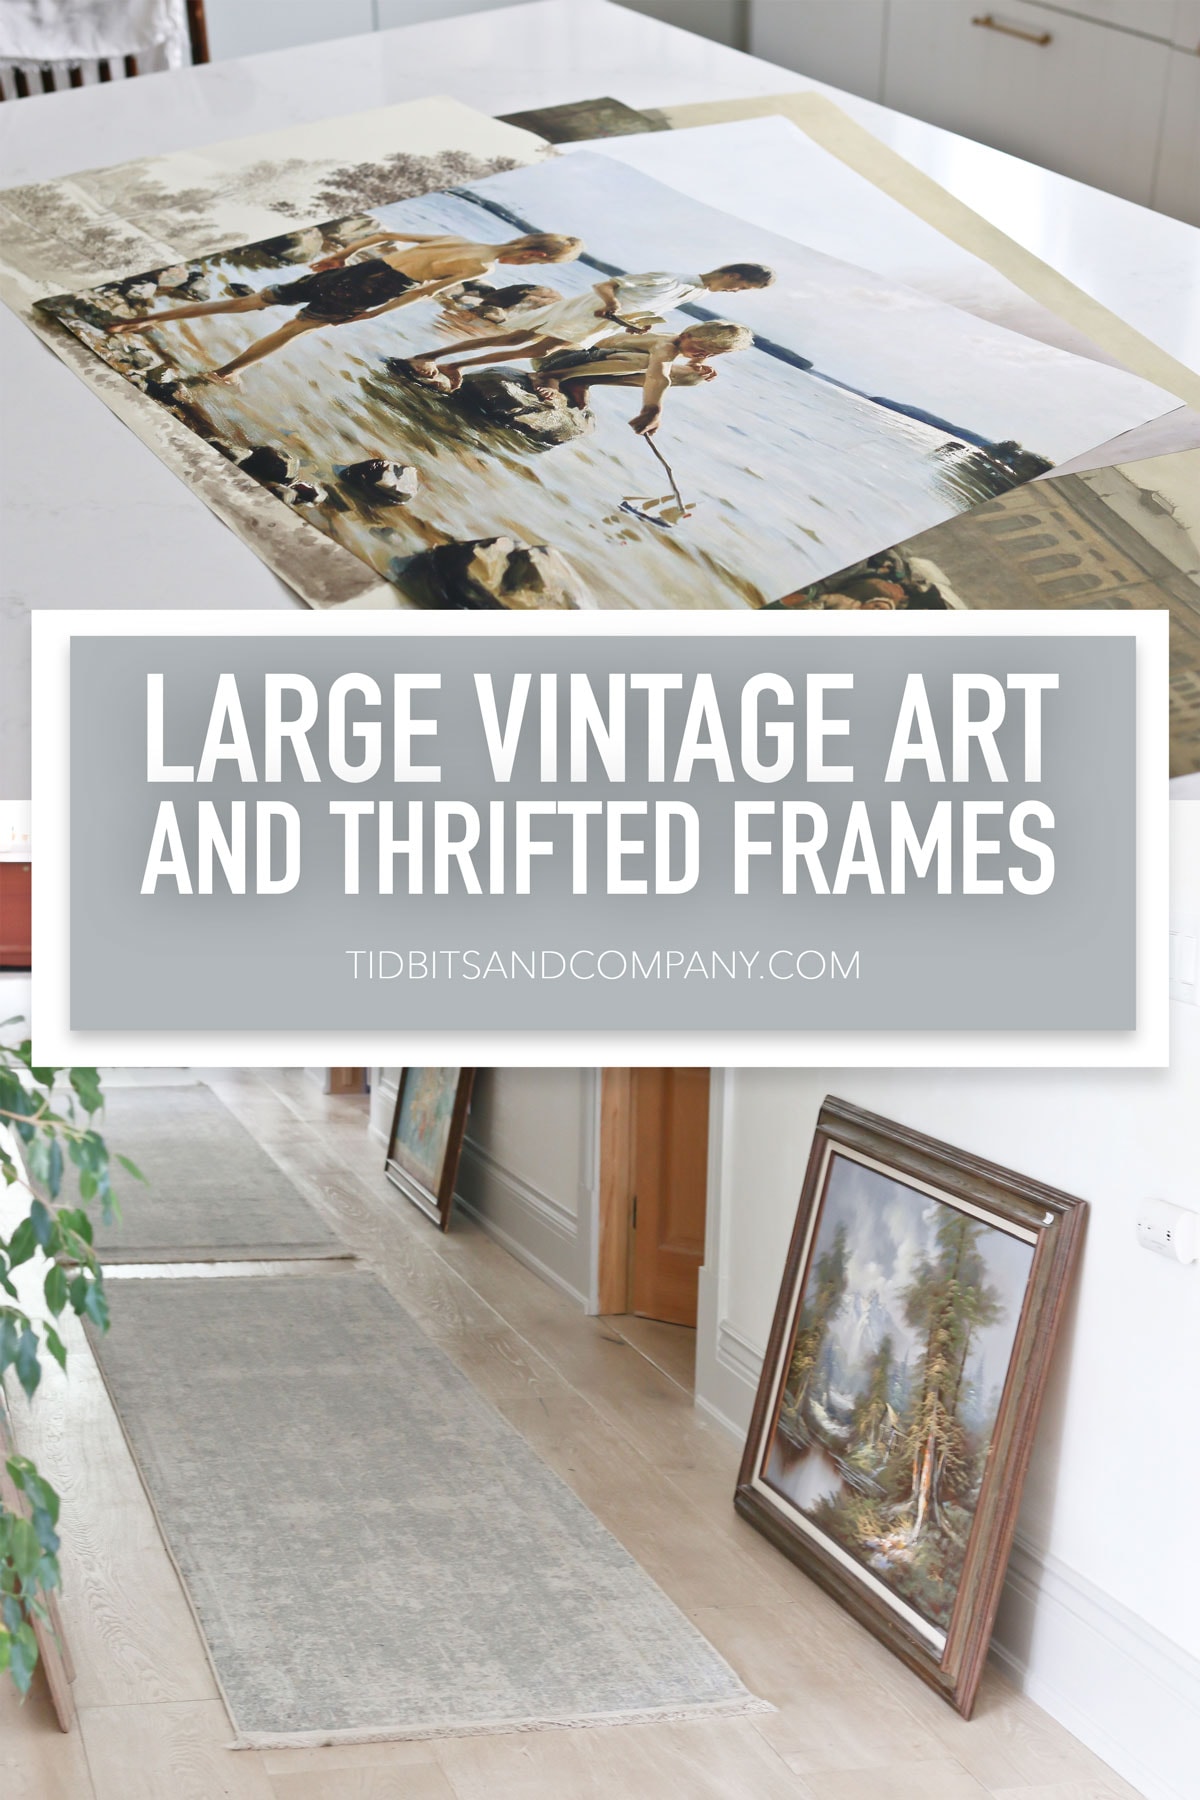 Text of large vintage art and thrifted frames over art images